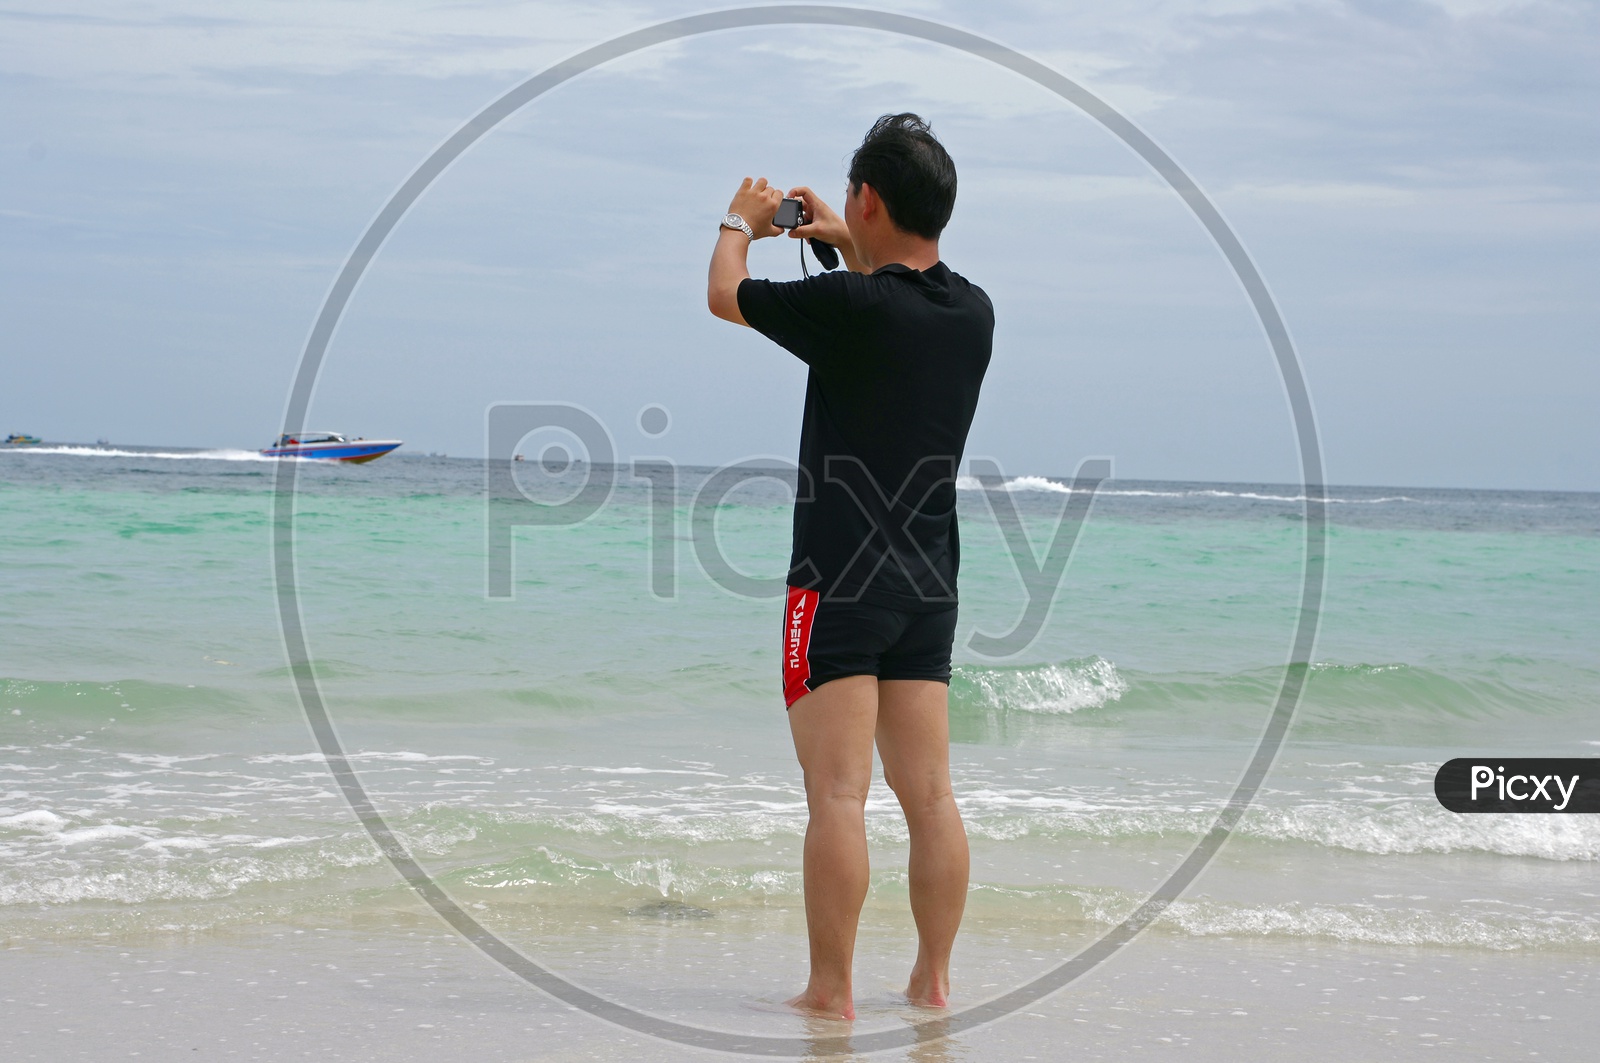 A Man Taking Picture Of Speed Boats In Sea